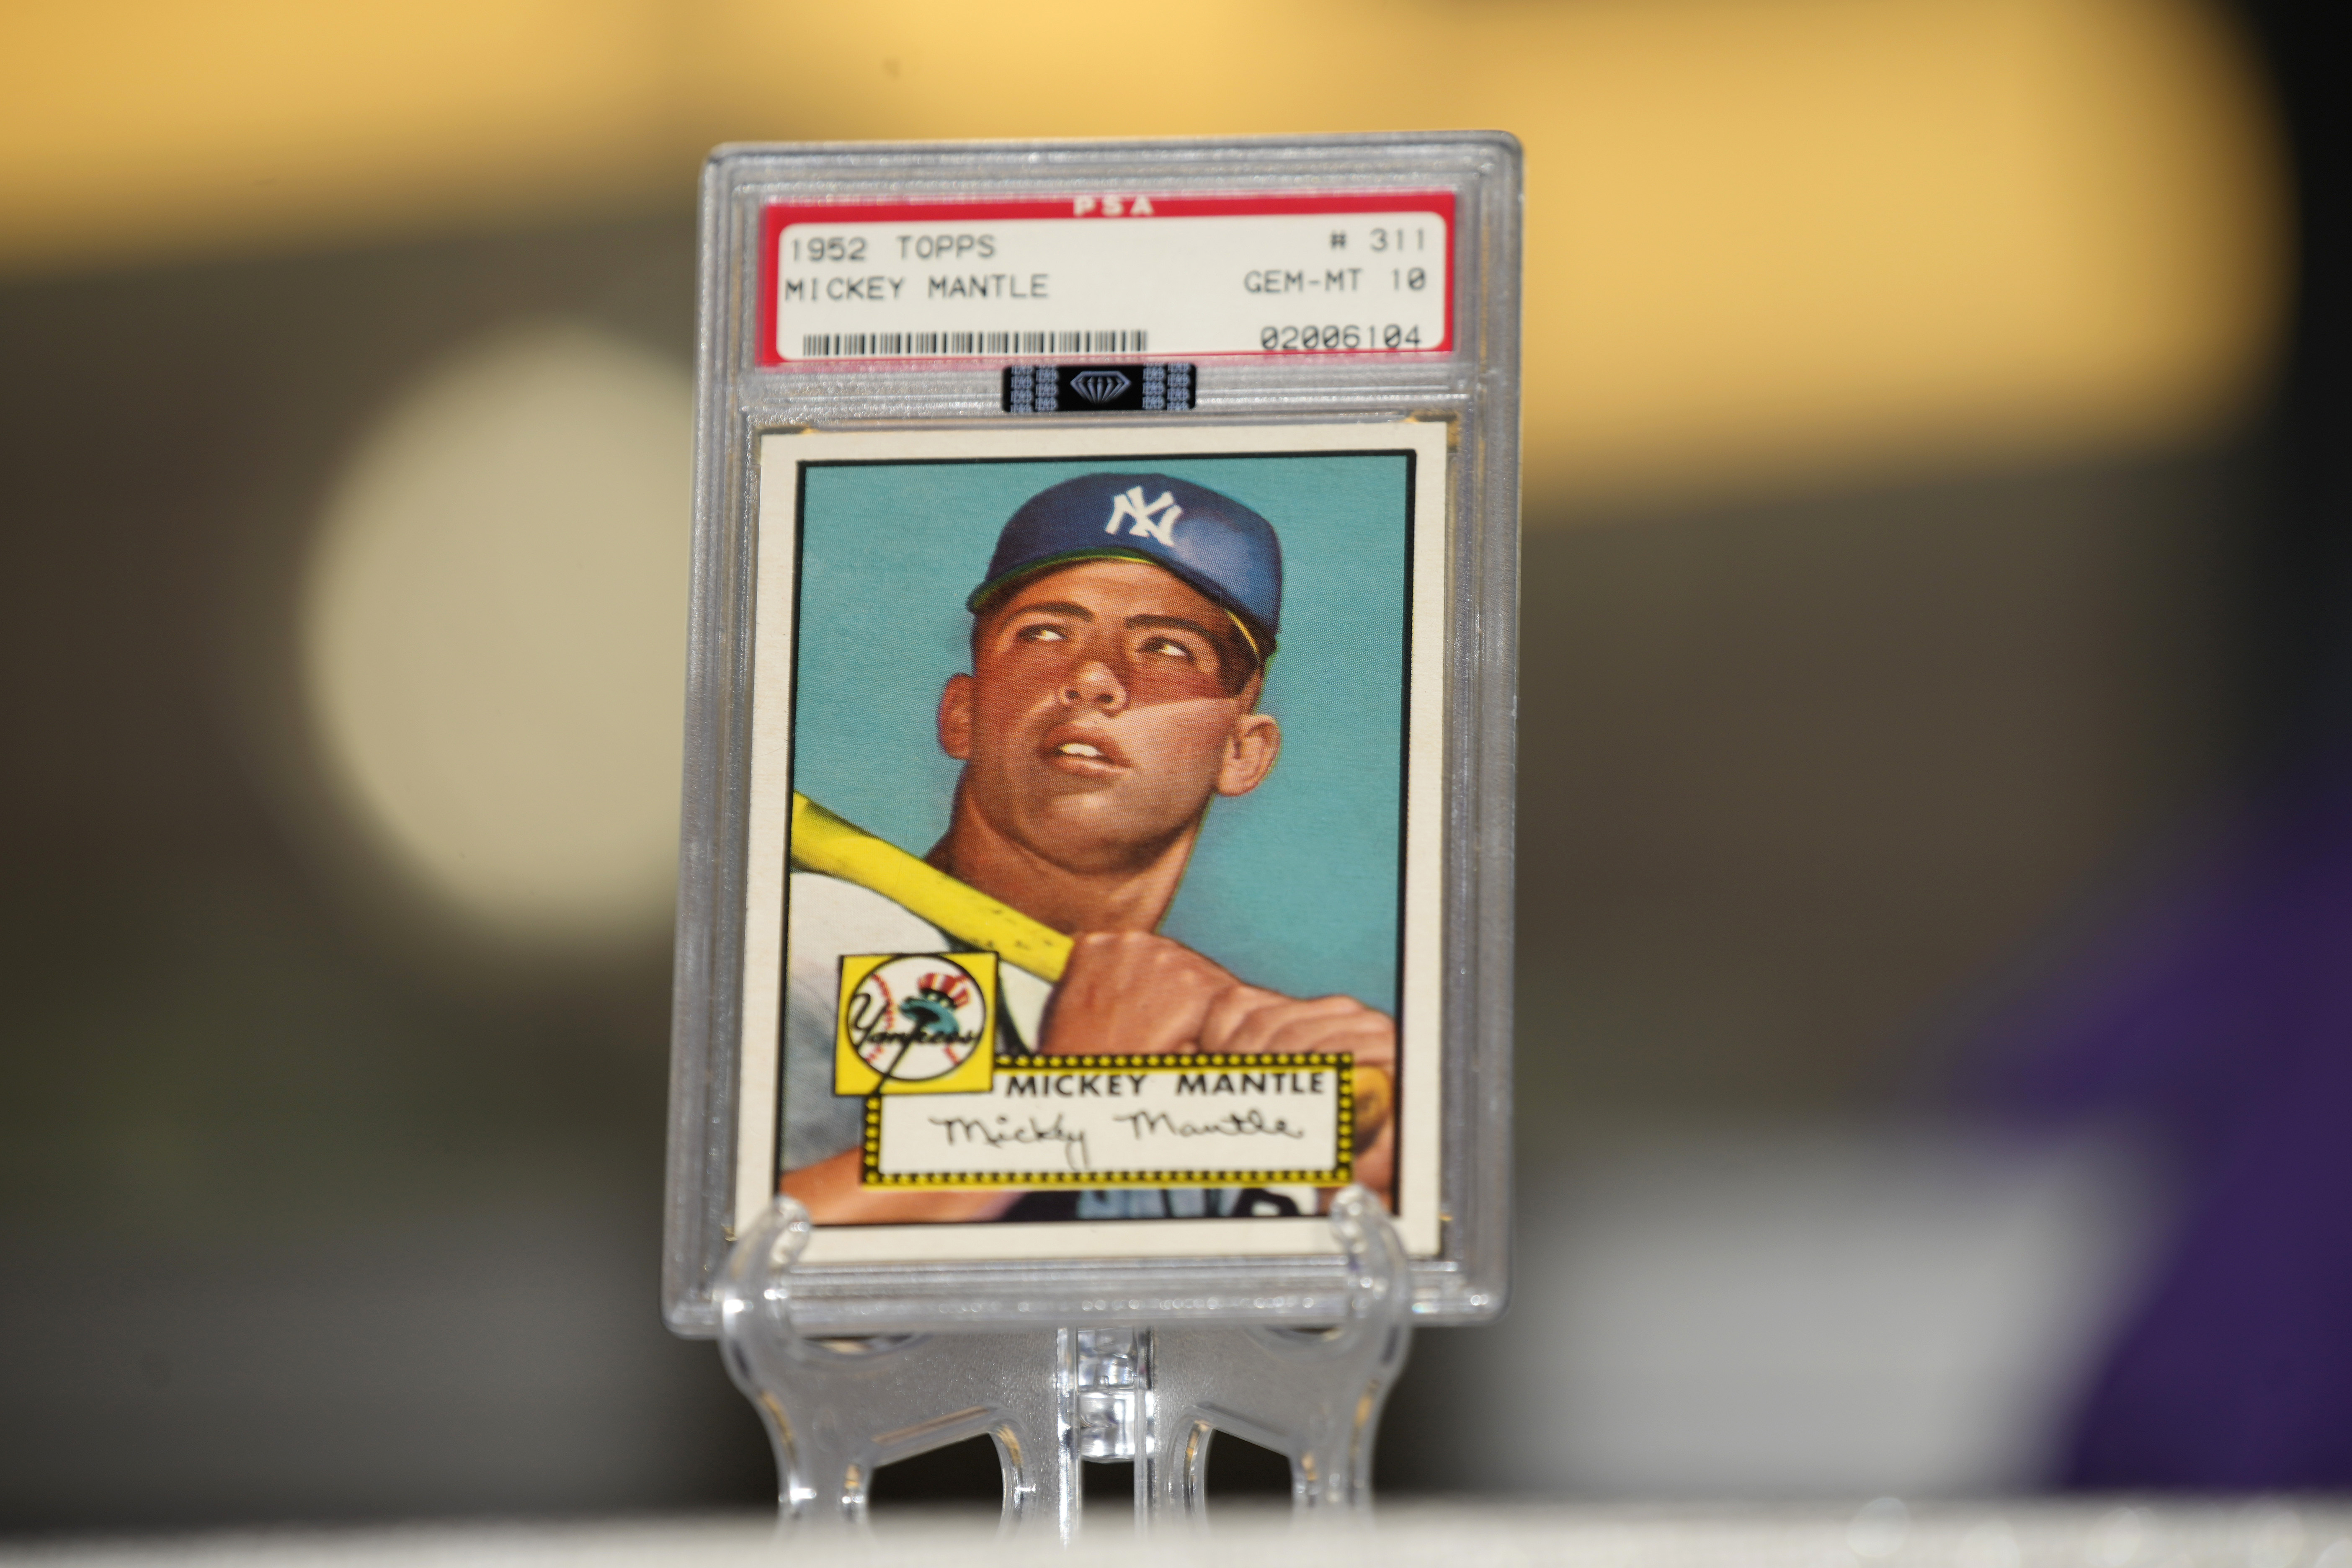 Mickey Mantle 1952 Topps 1-of-1 Card Auctions for Over $470K to